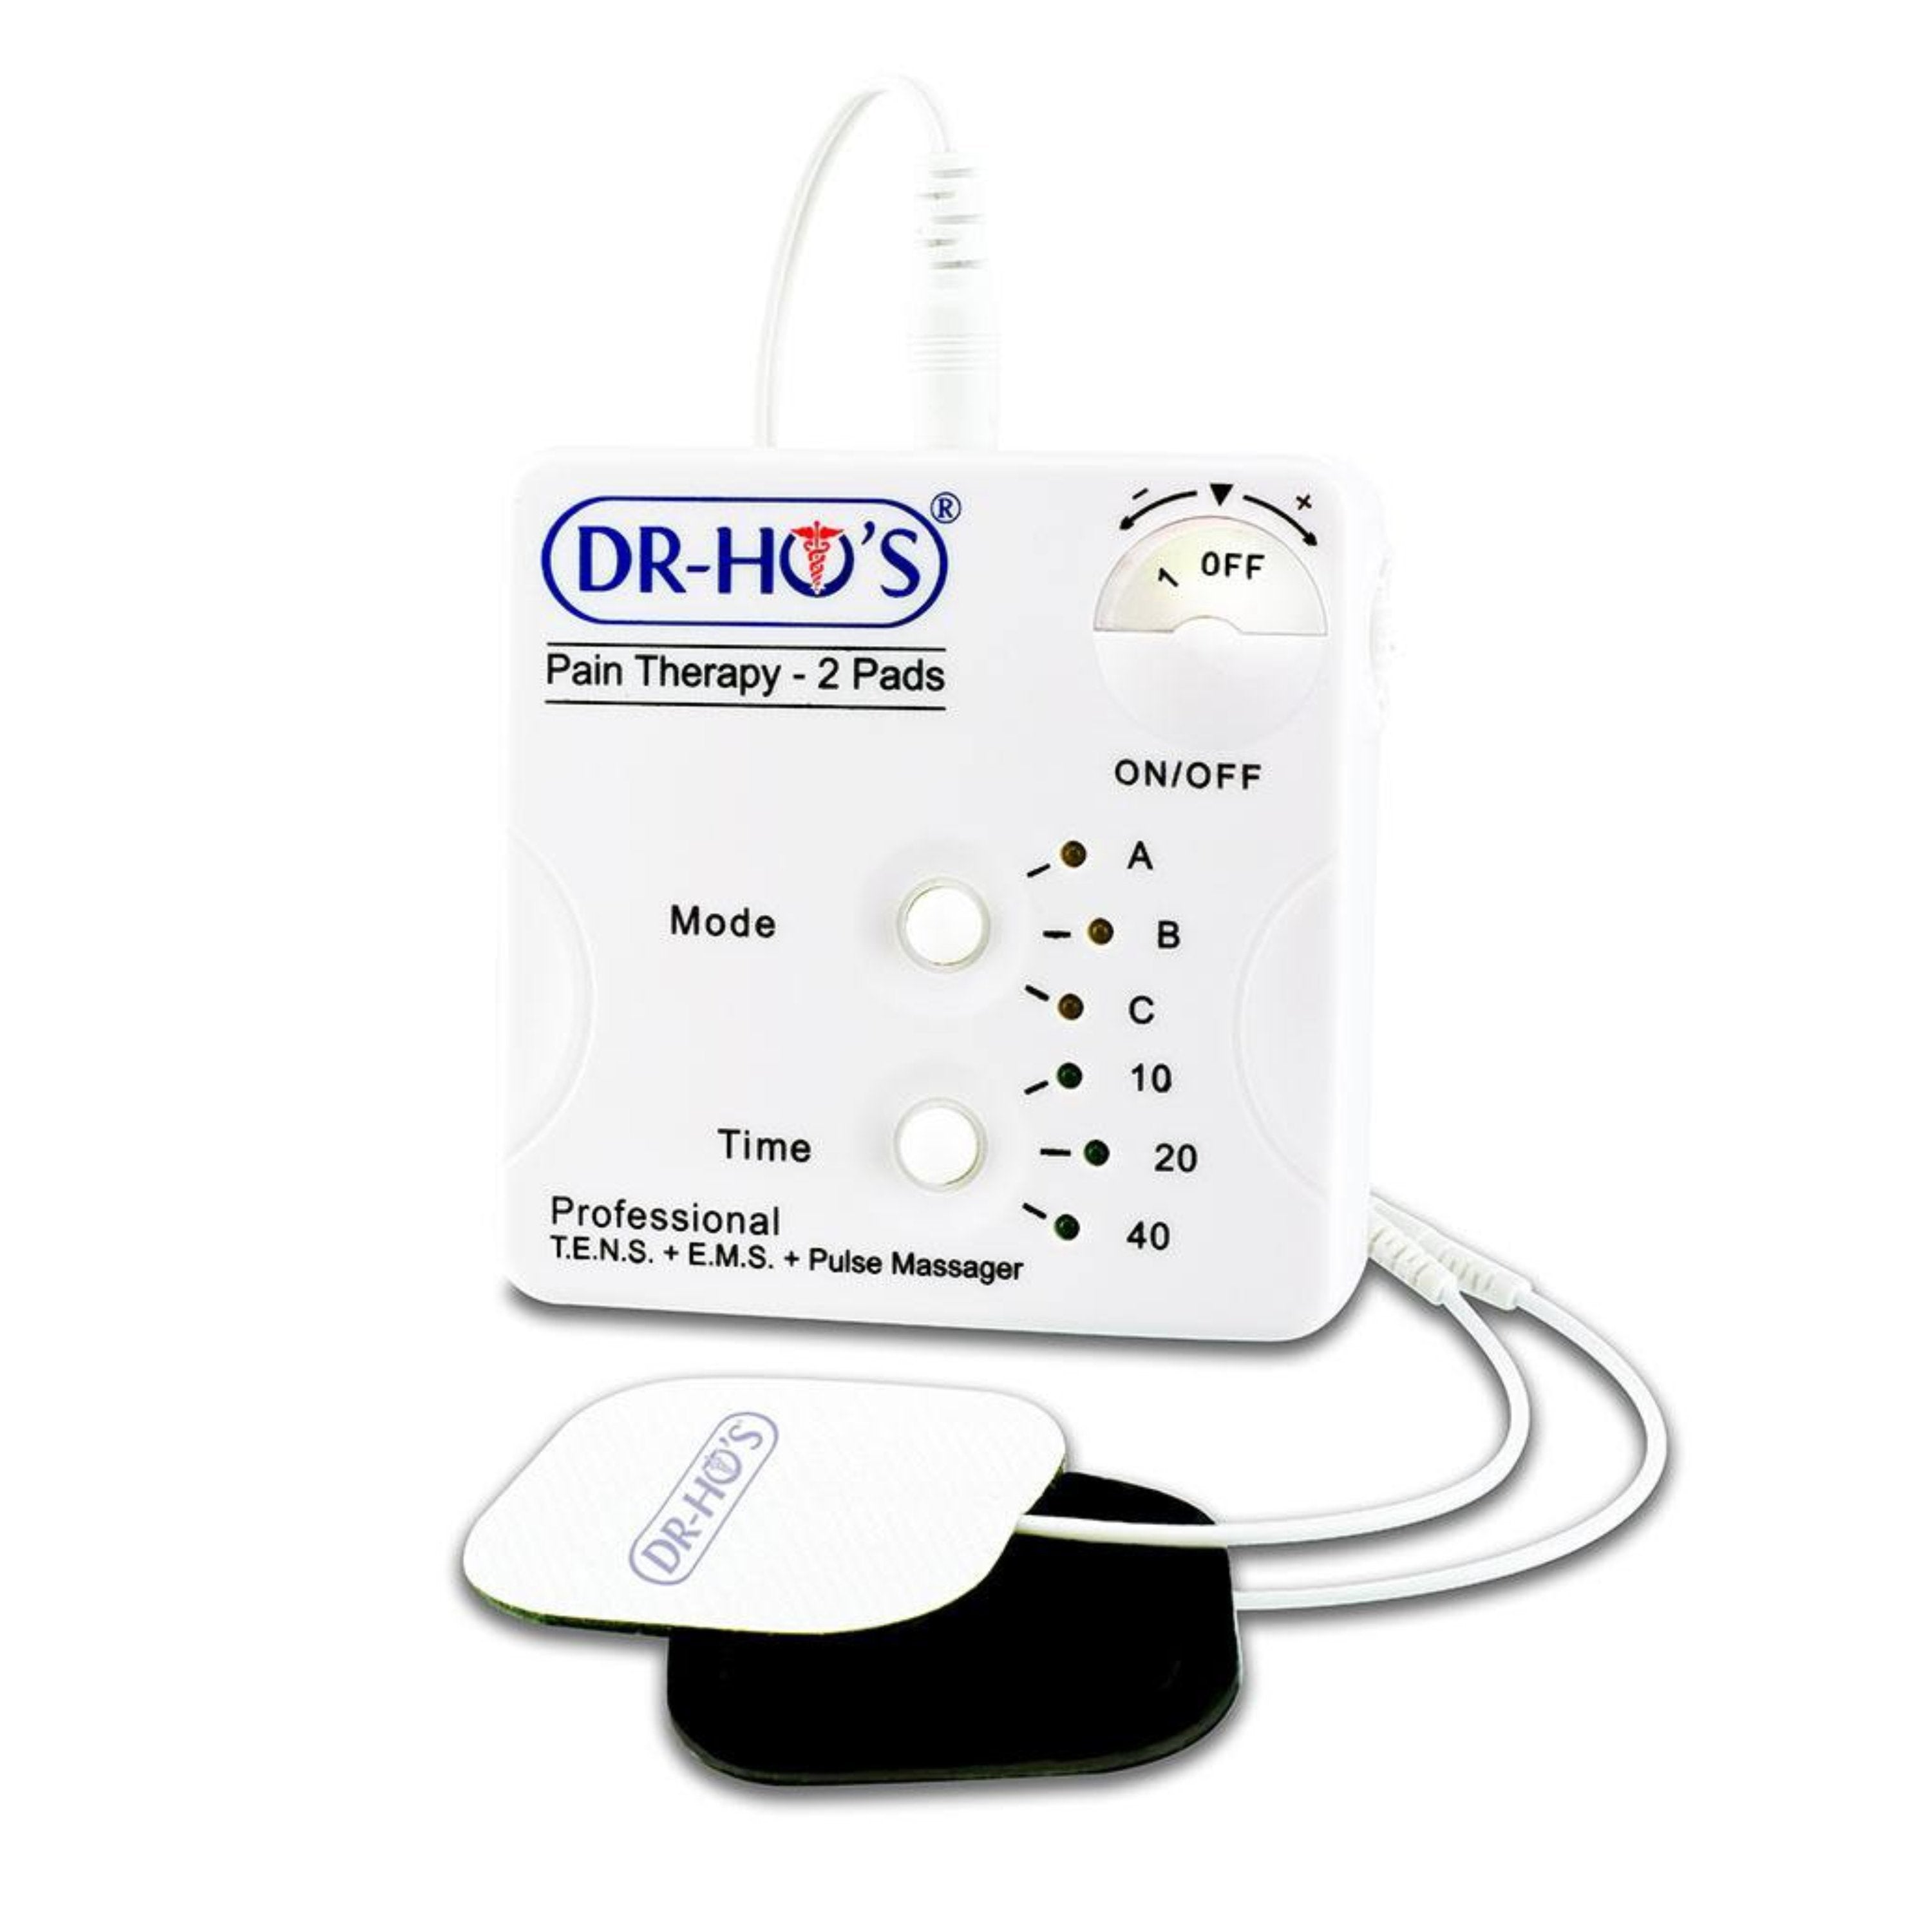 DR-HO'S Neck Pain Pro Ultimate Package - Tens Therapy, EMS Therapy and DR-HO'S Proprietary Amp - Helps Temporarily Relieve Neck and Shoulder Pain